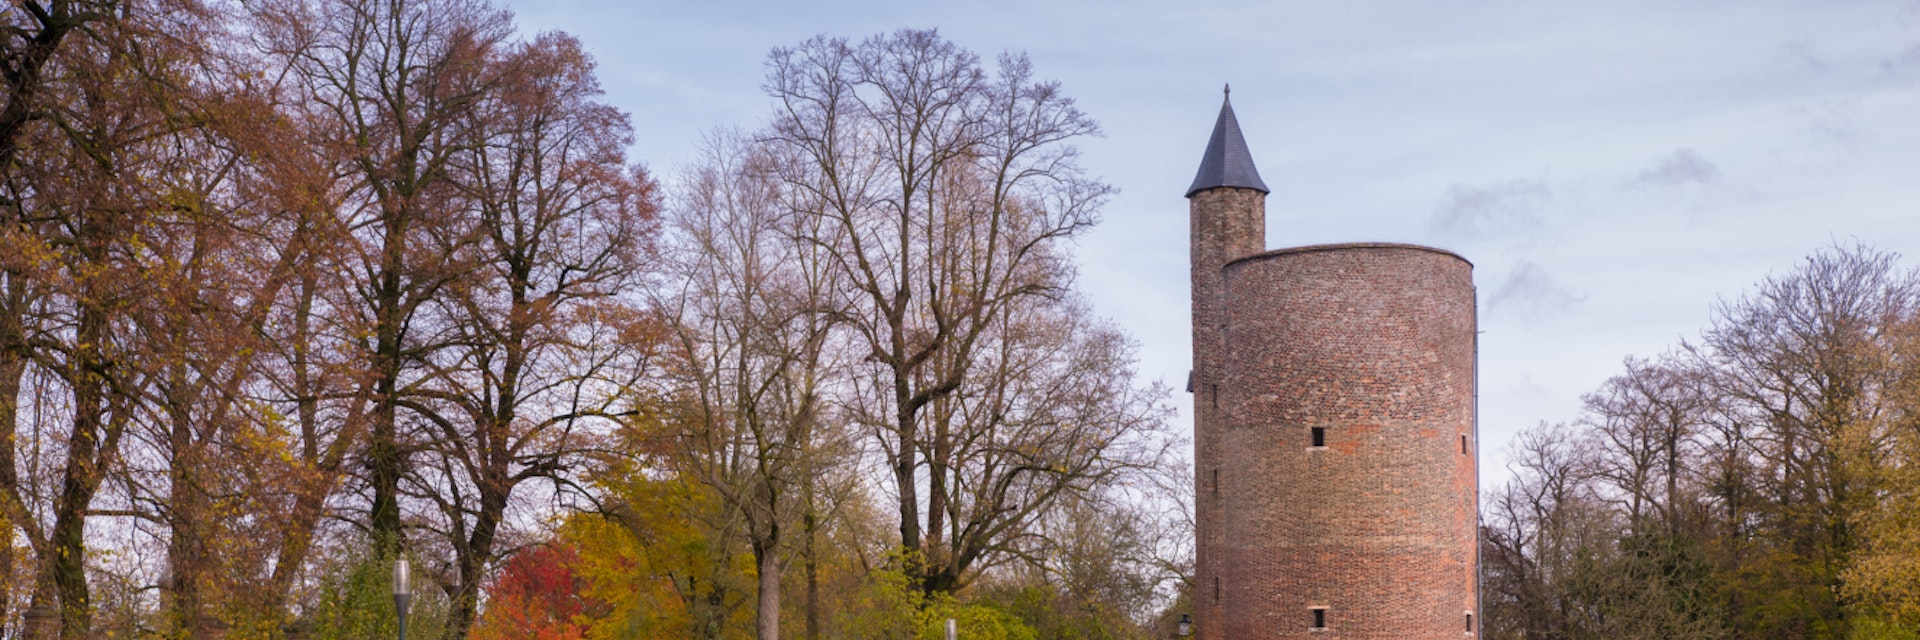 Tower in Minnewater park in Bruges, Belgium; Shutterstock ID 525022591; Your name (First / Last): Daniel Fahey; GL account no.: 65050; Netsuite department name: Online Editorial; Full Product or Project name including edition: POI image